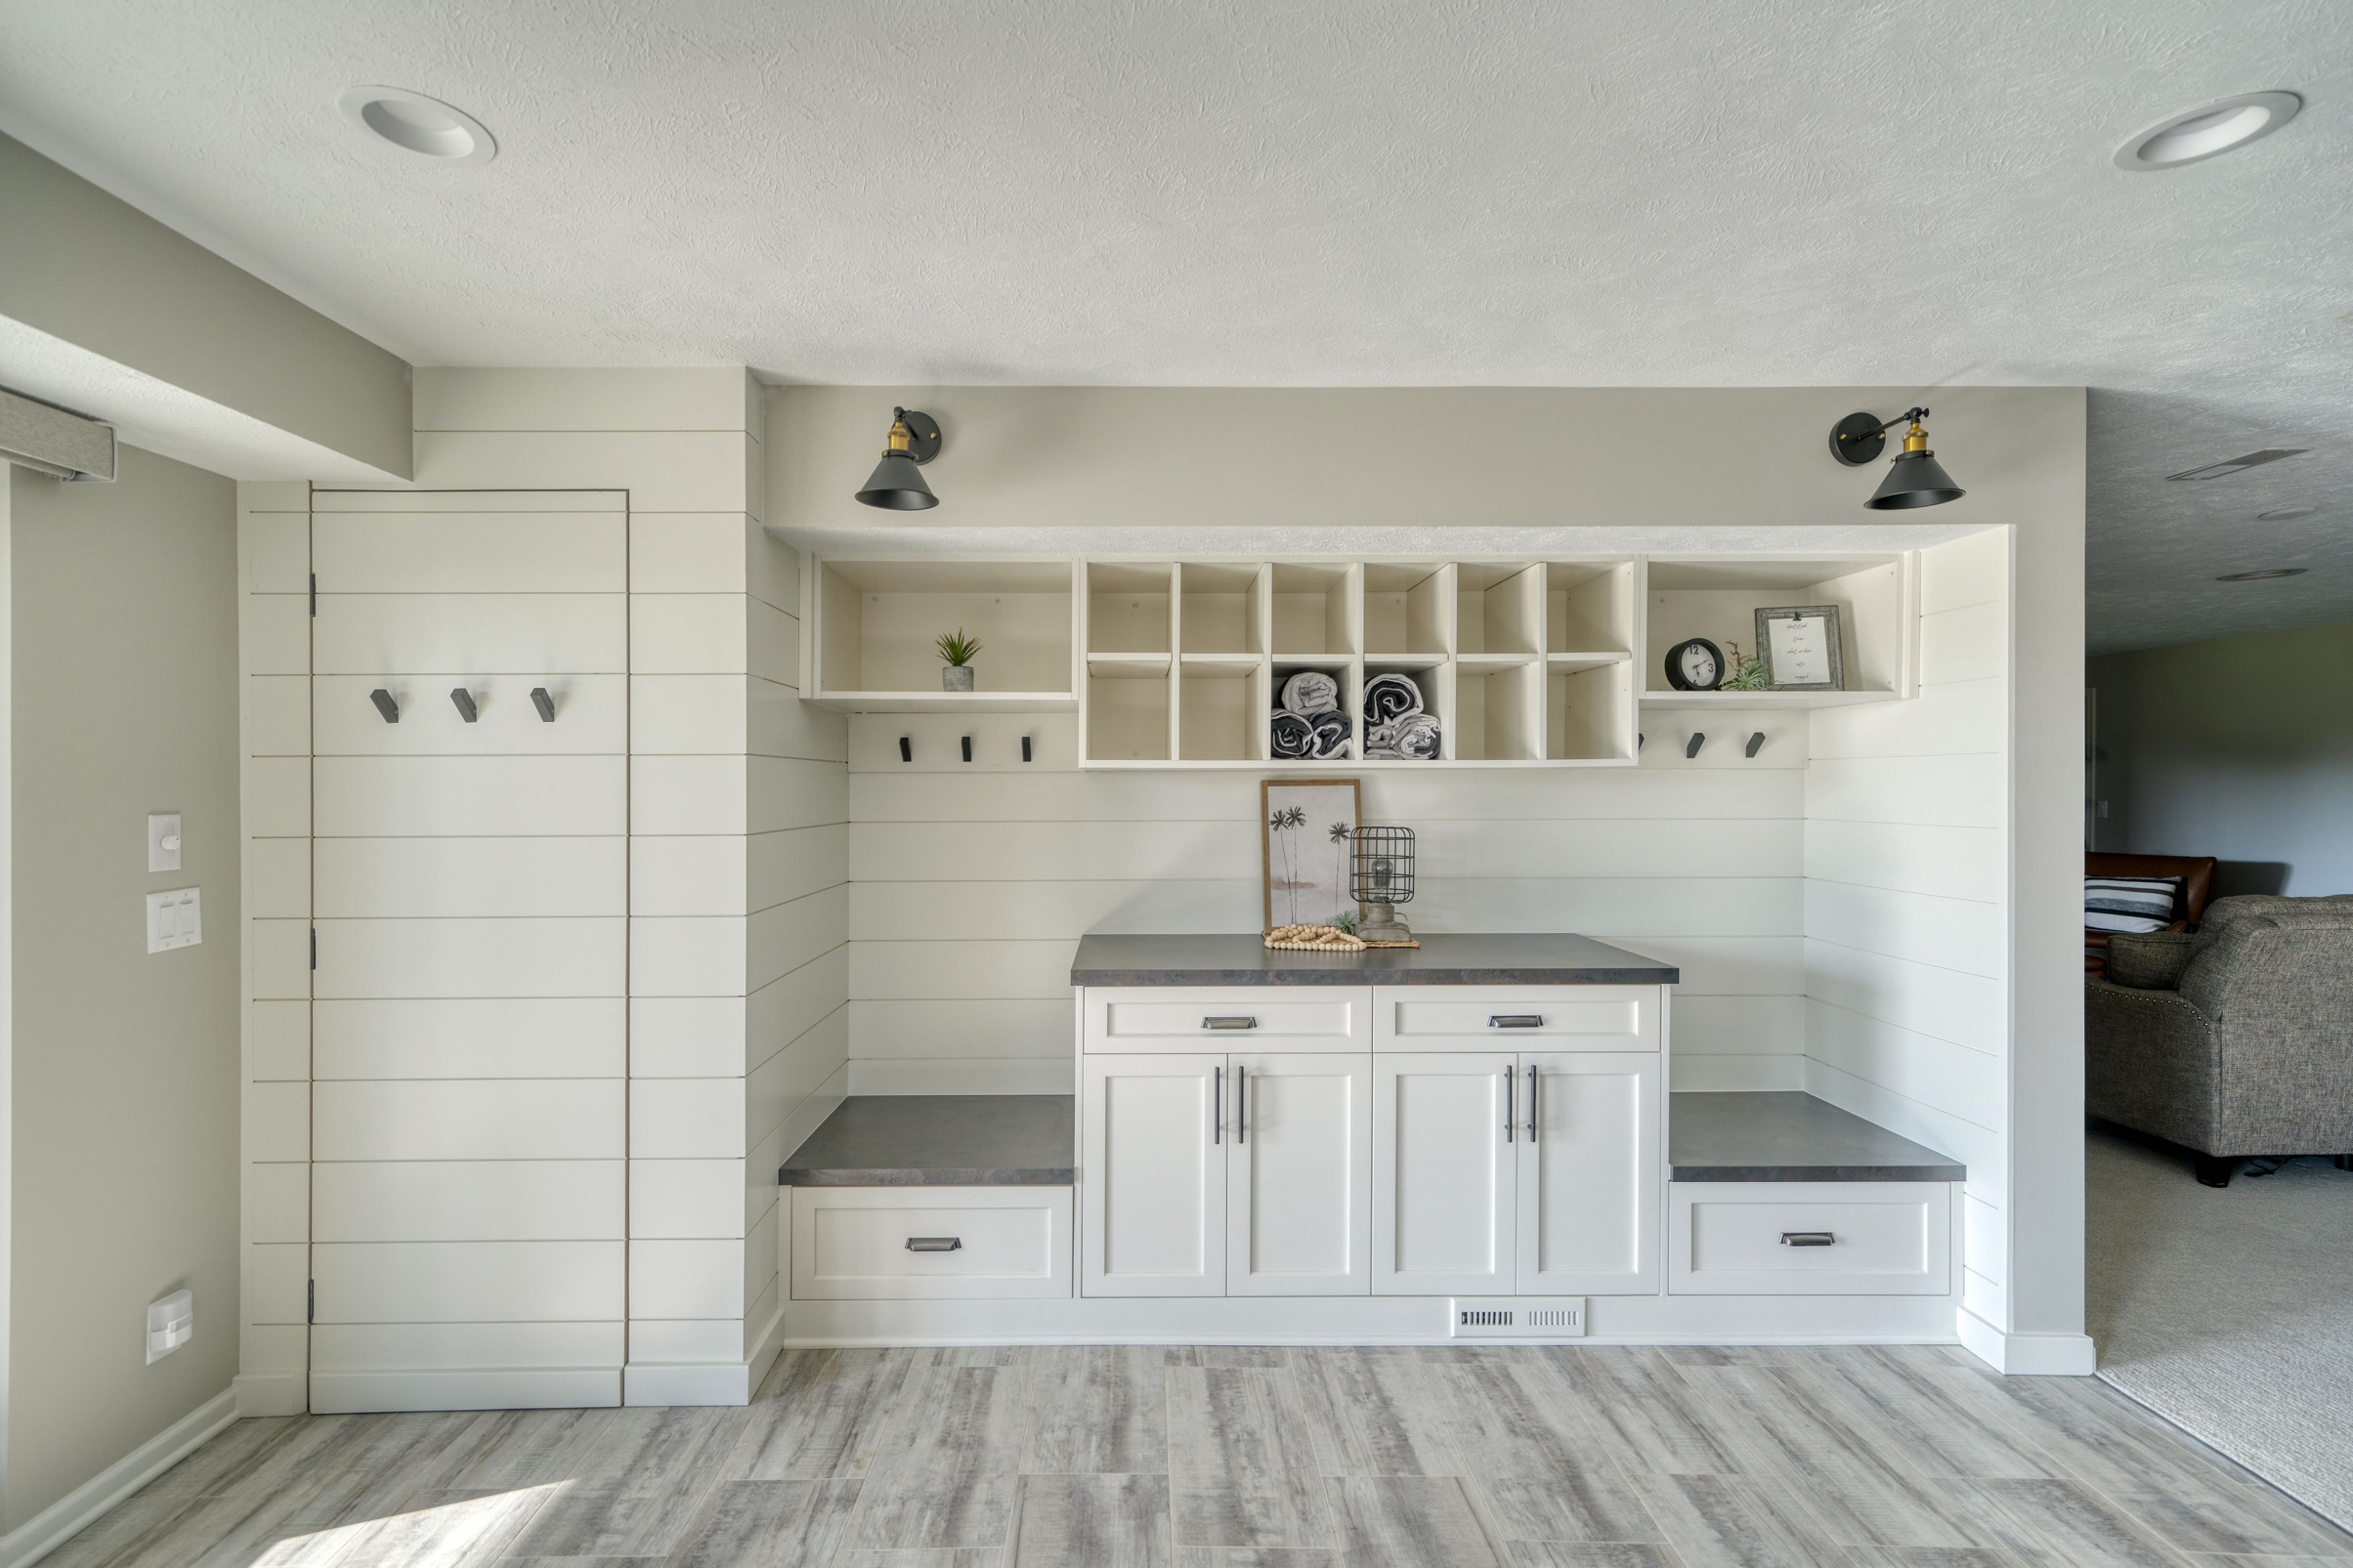 White cabinets that hold towels and knicknacks